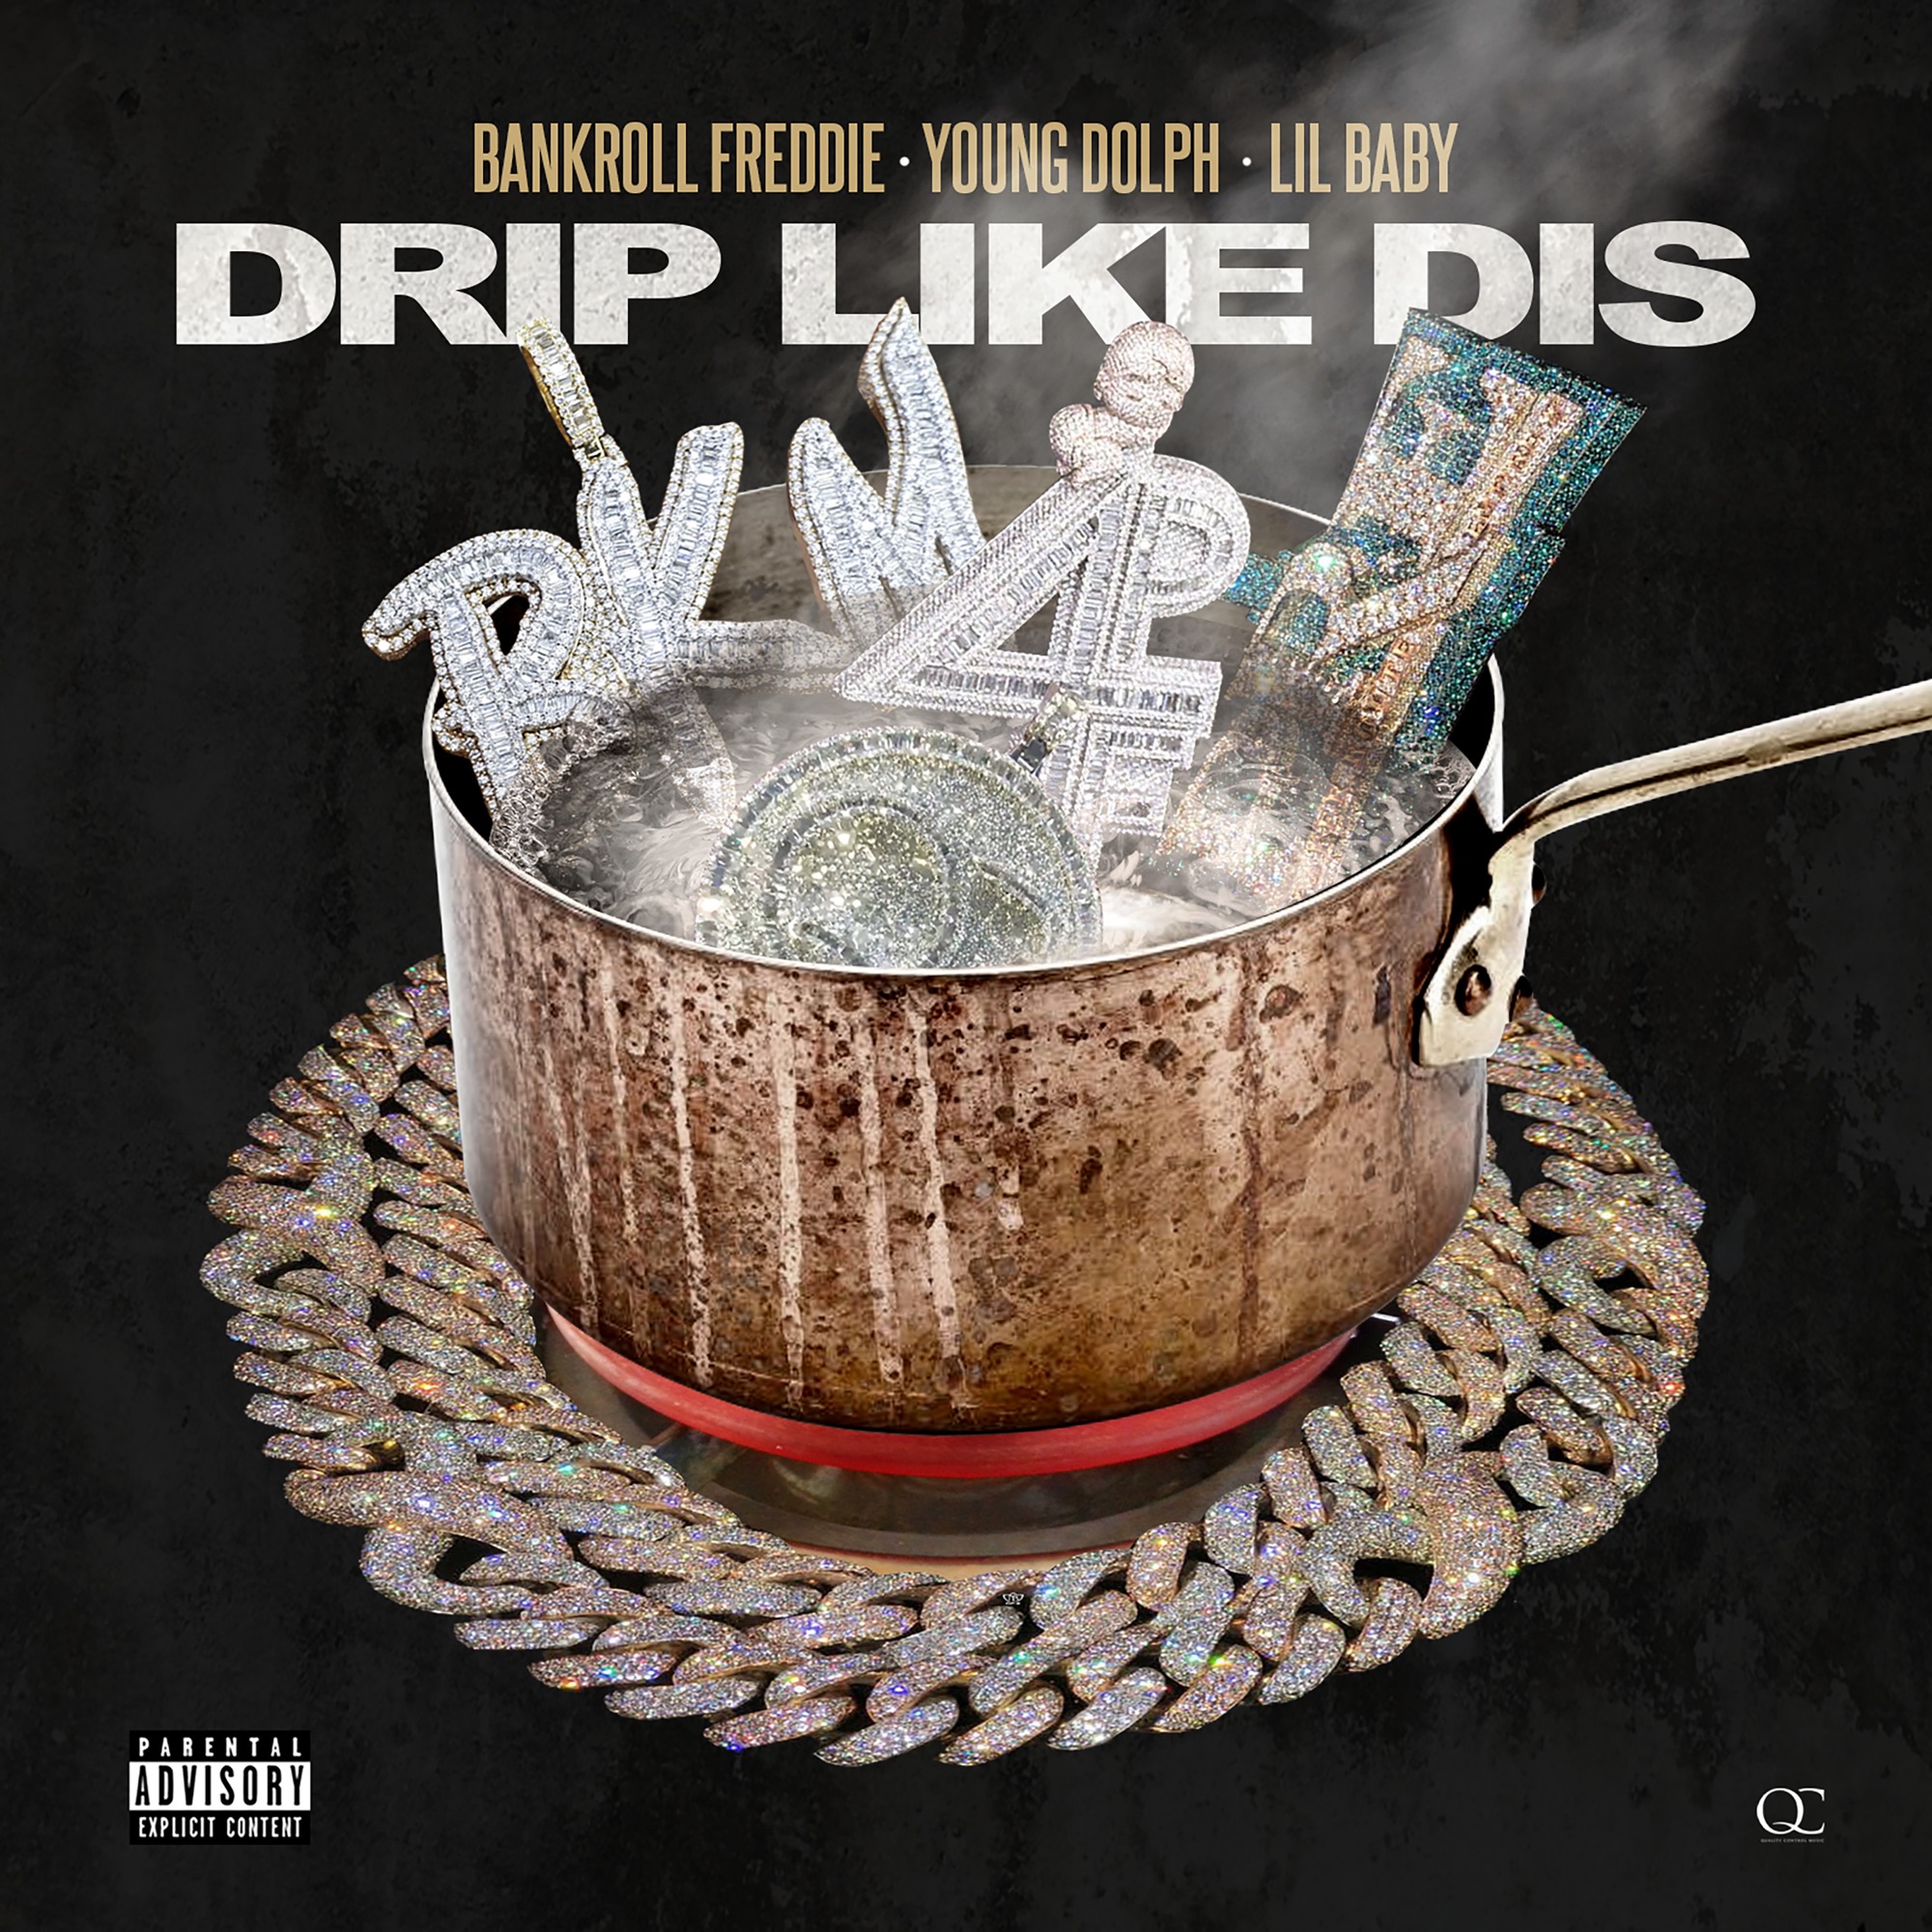 Art for Drip Like Dis by Bankroll Freddie, Young Dolph & Lil Baby